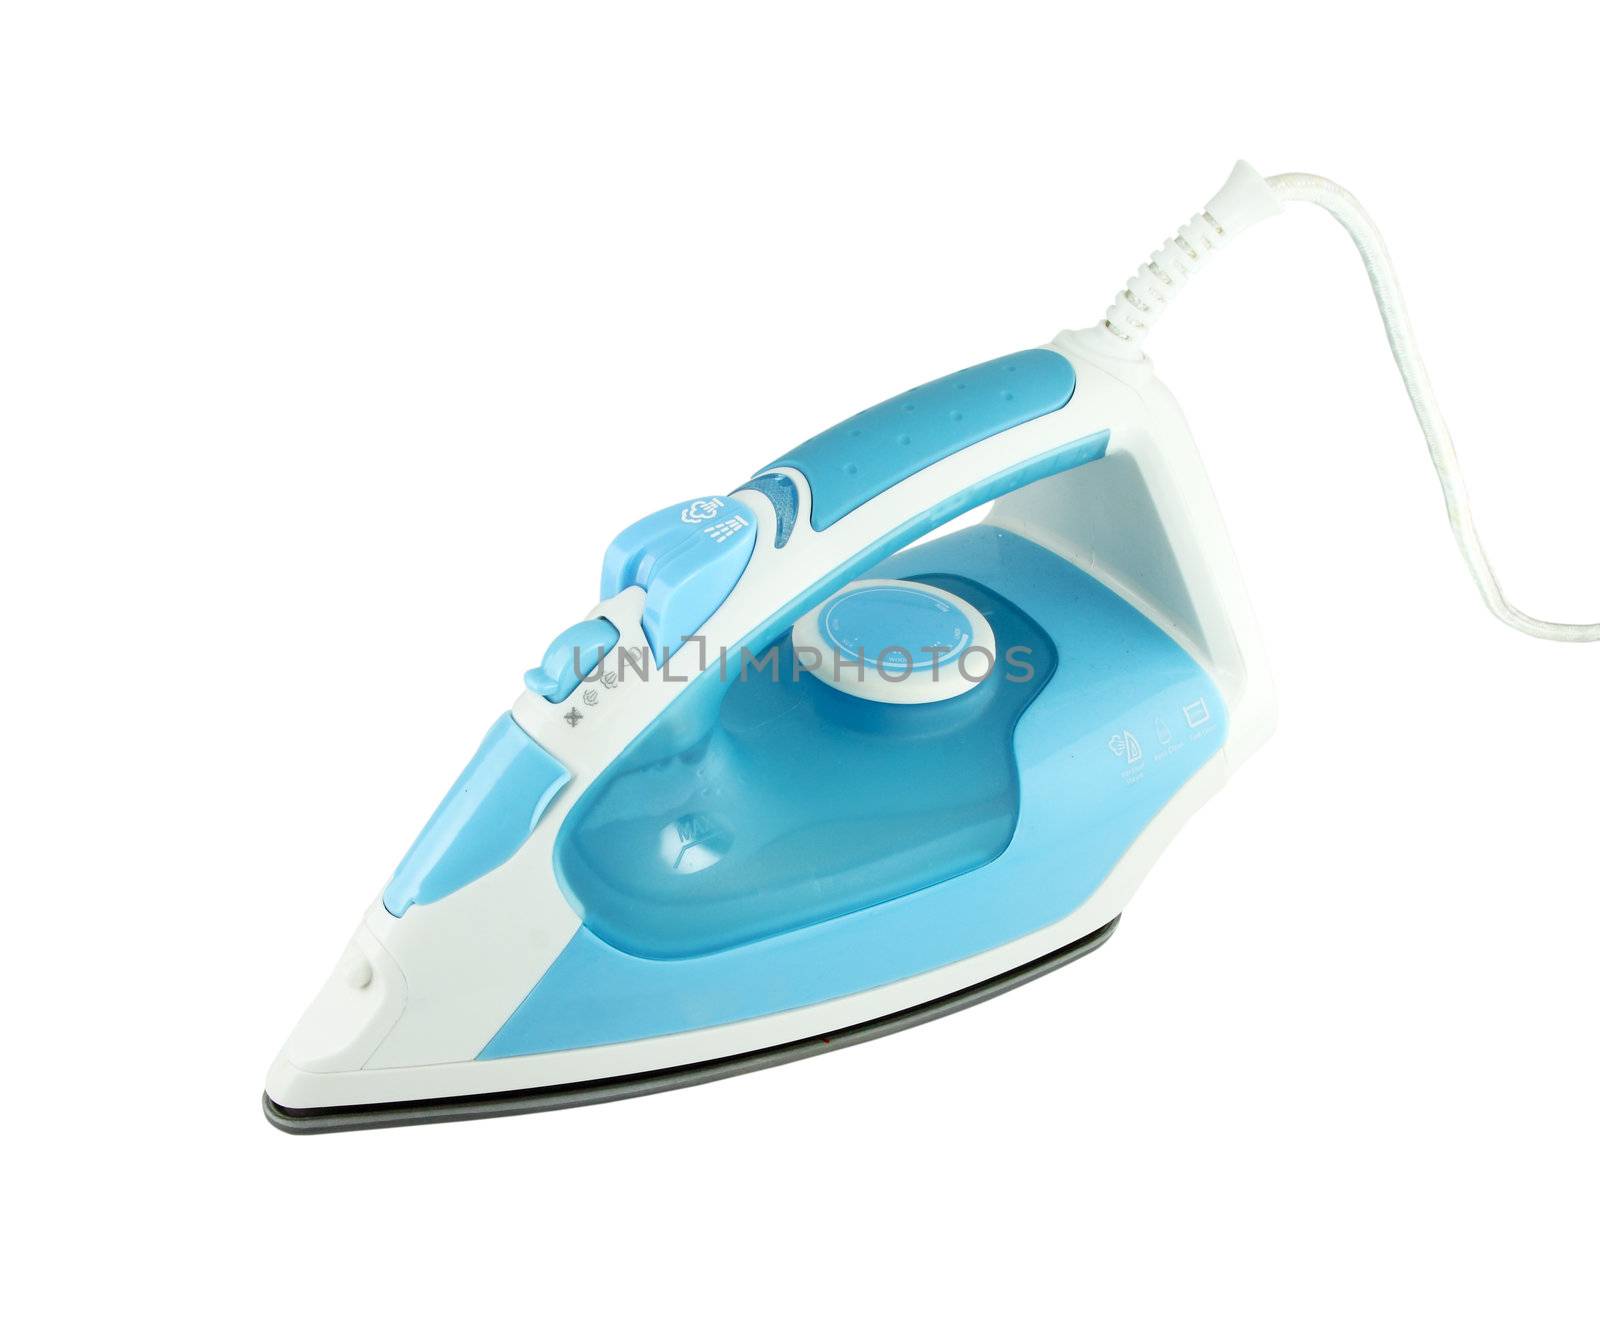 Steam iron isolated on white by geargodz